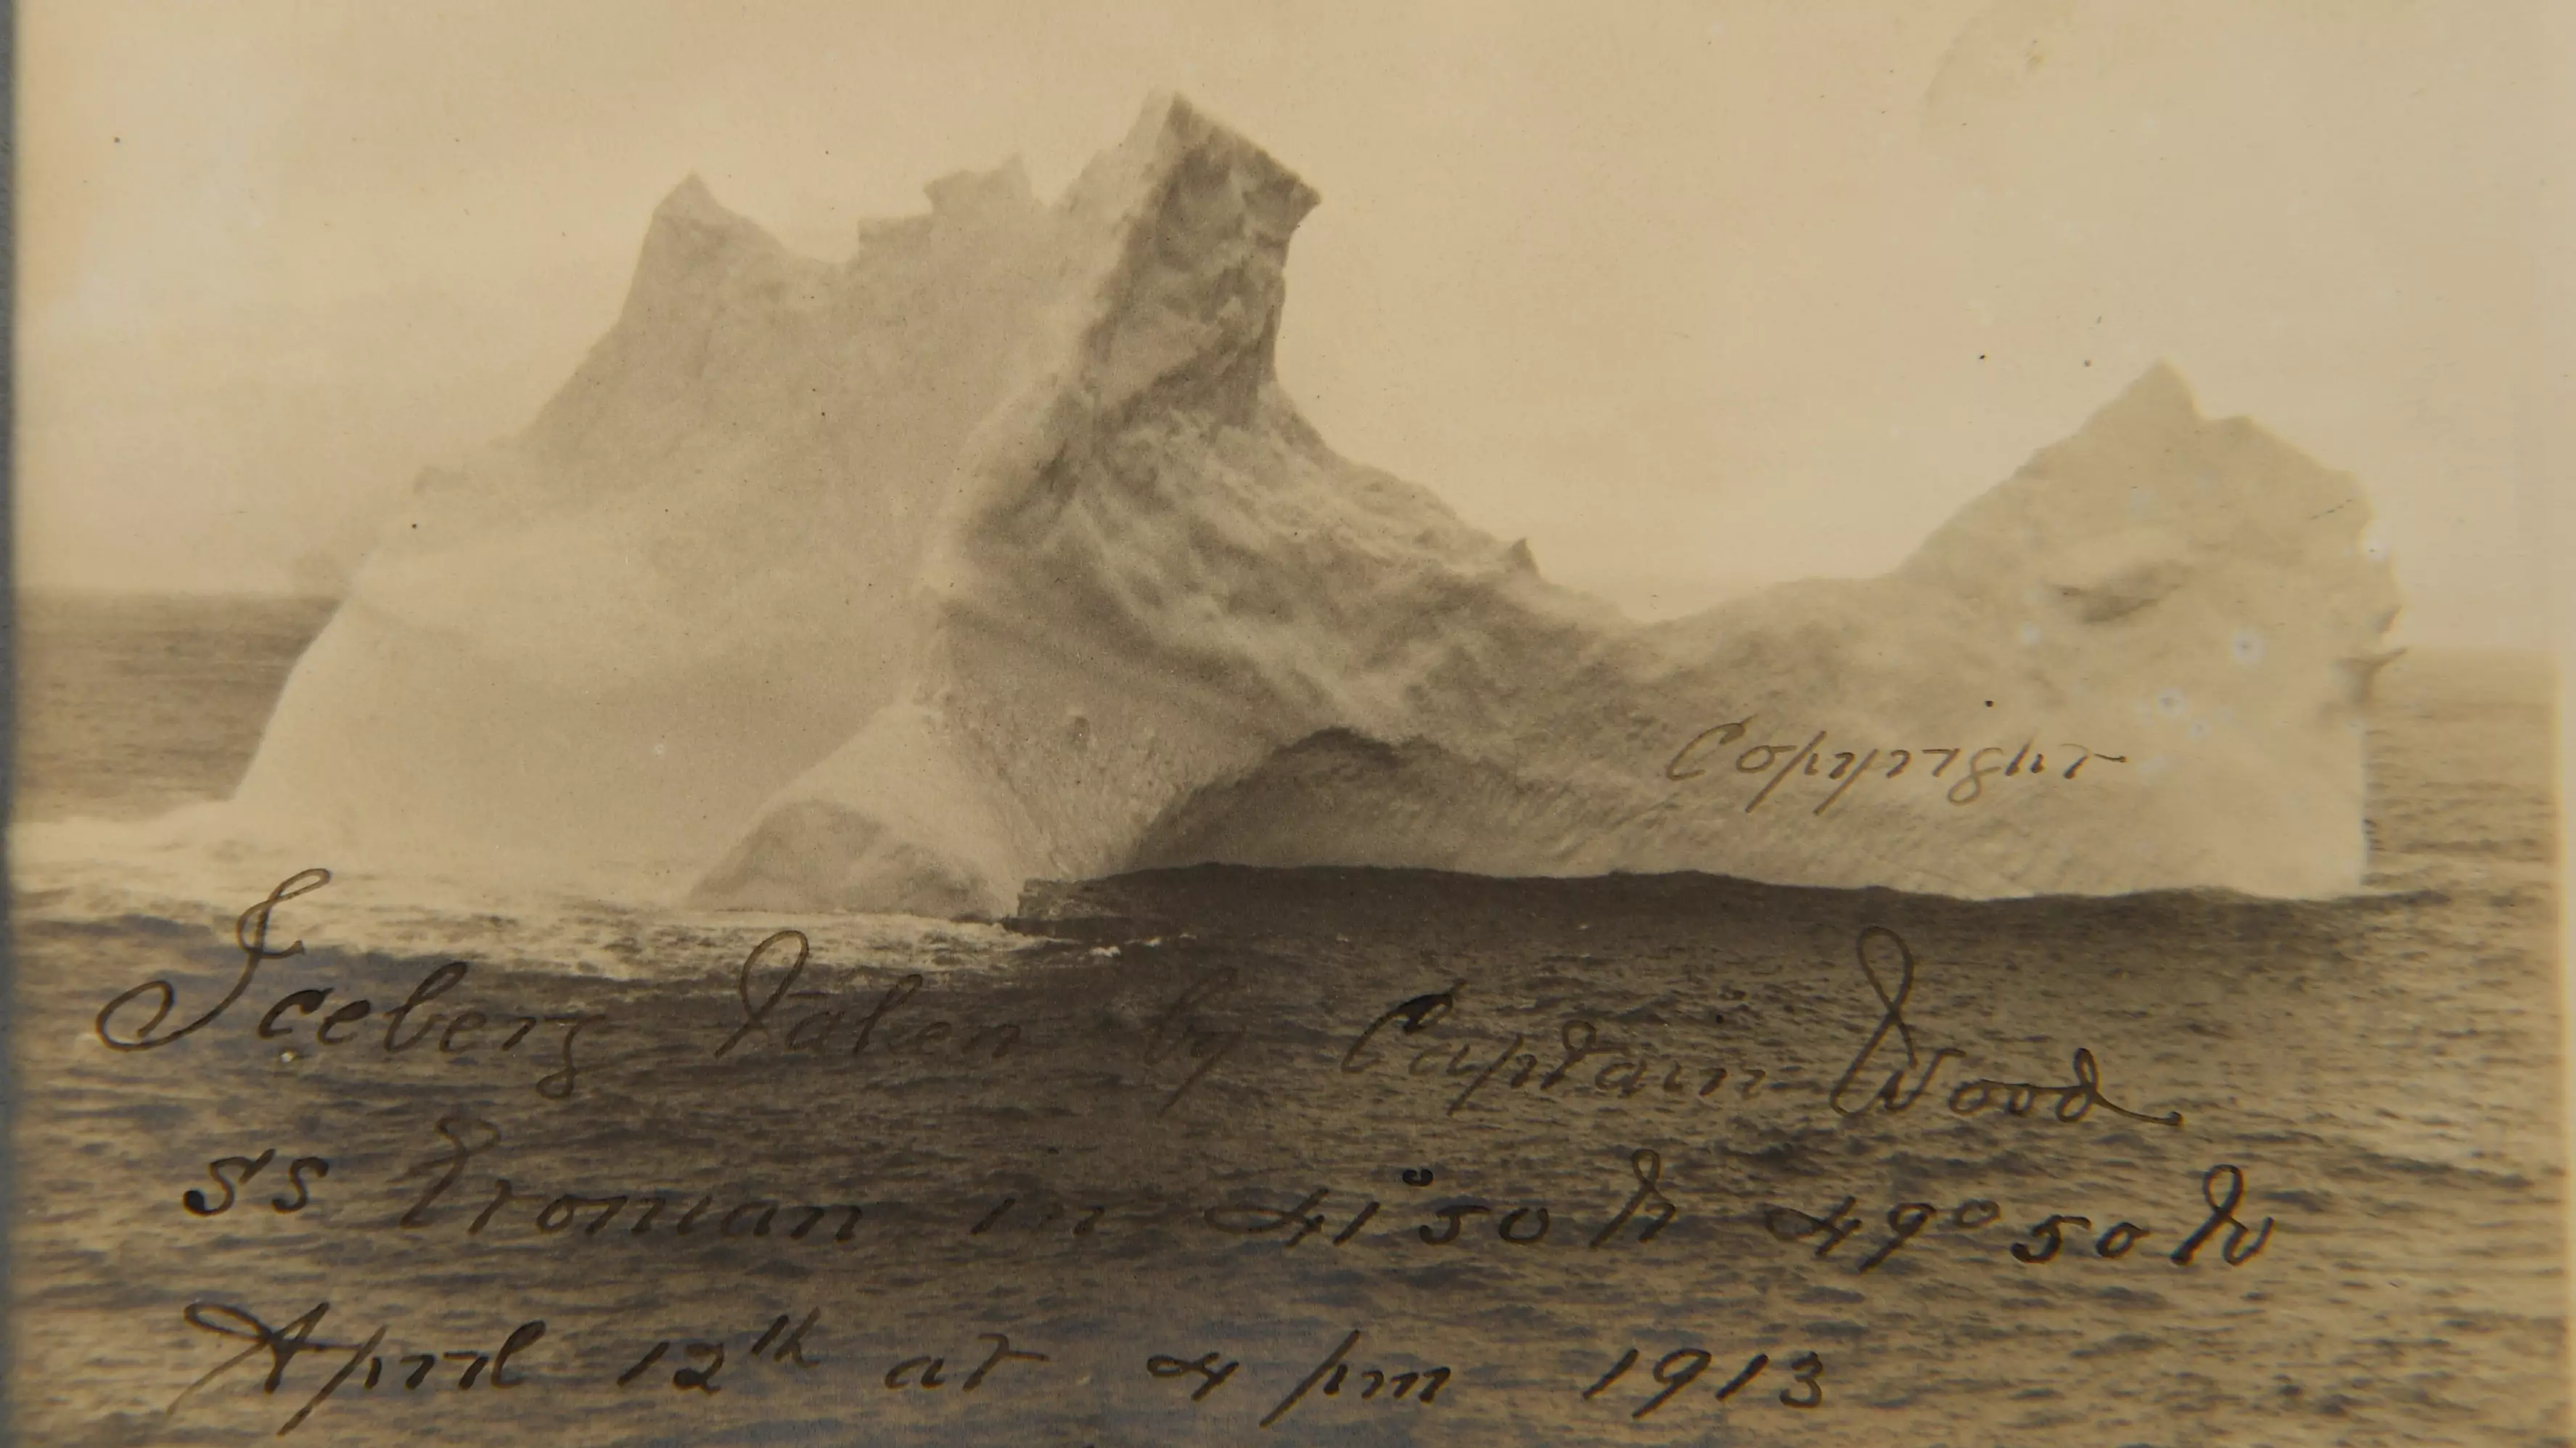 Photograph Of Iceberg 'Most Likely' To Have Sunk The Titanic Has Surfaced 108 Years Later